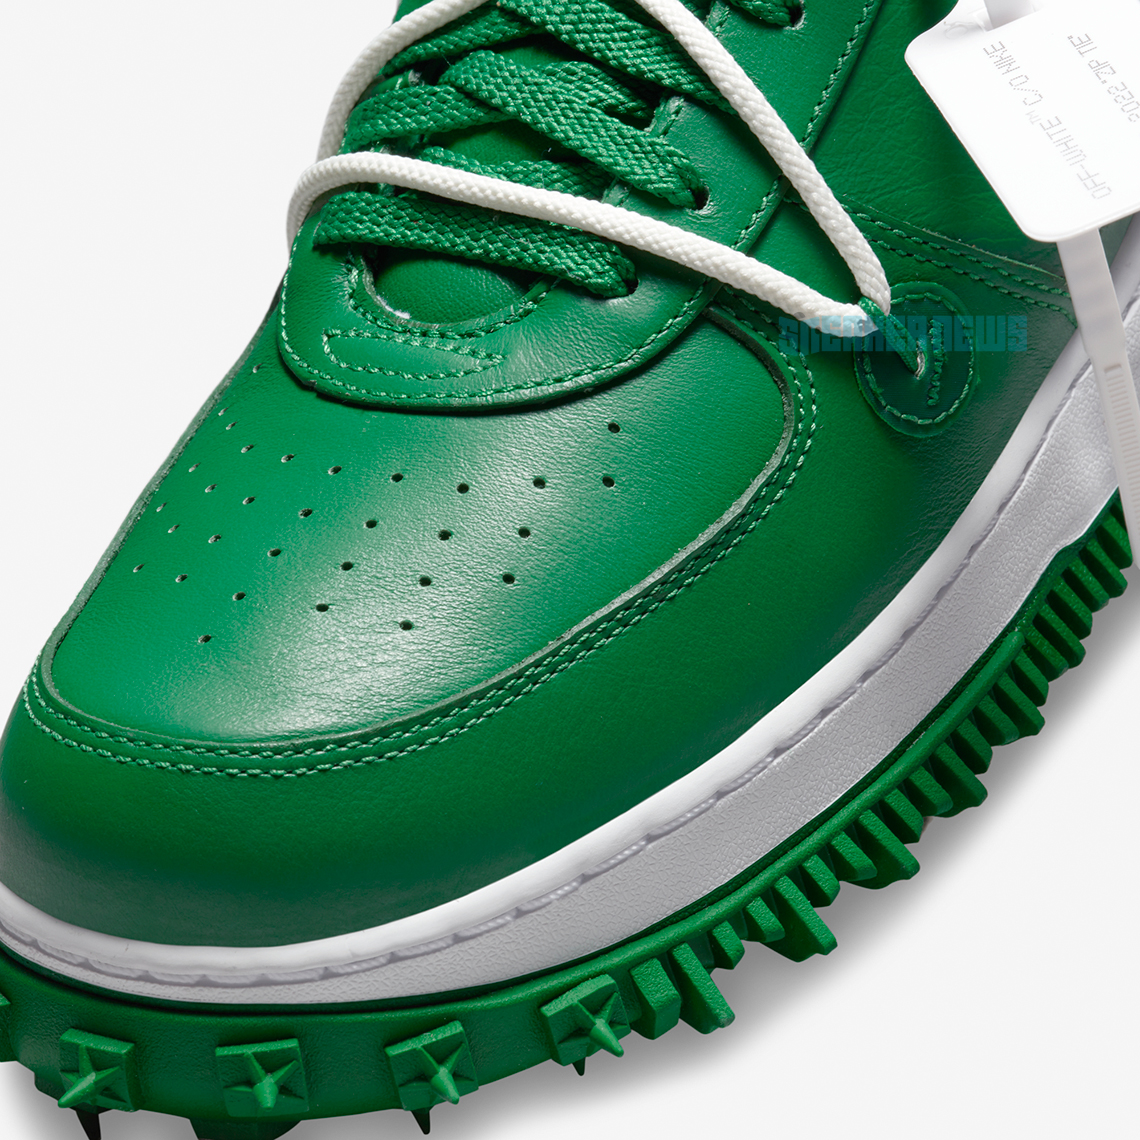 The Off-White x Nike Air Force 1 Mid Pine Green Releases April 28th -  Sneaker News